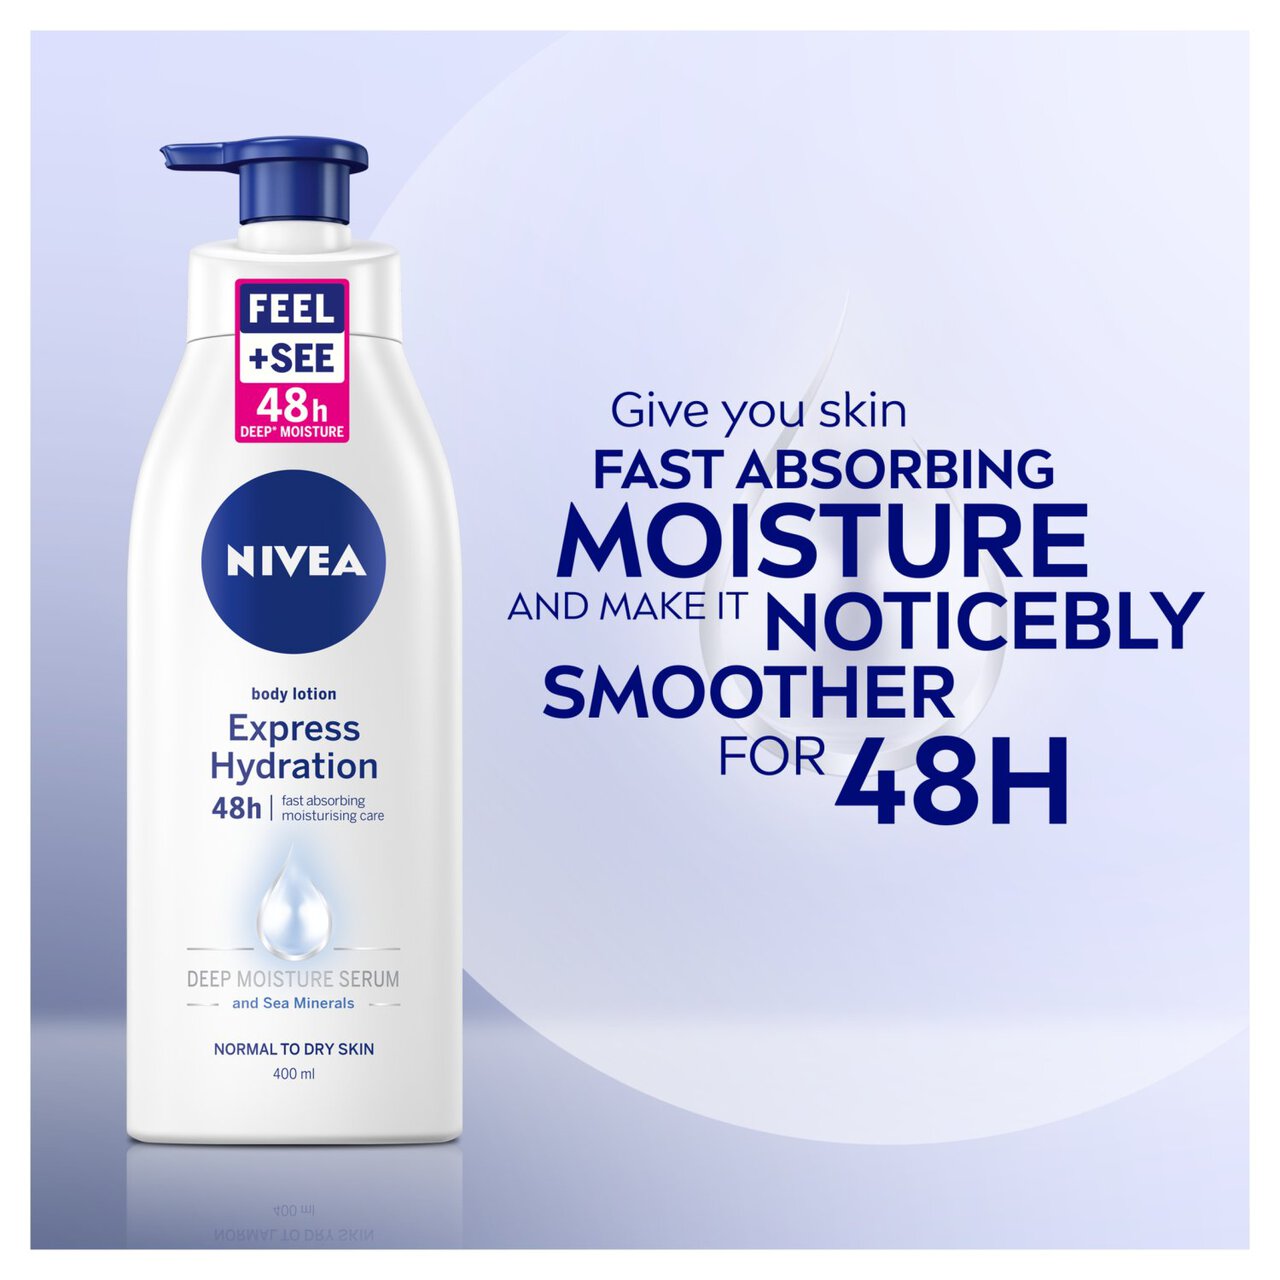 NIVEA Body Lotion for Normal Skin, Express Hydration 400ml